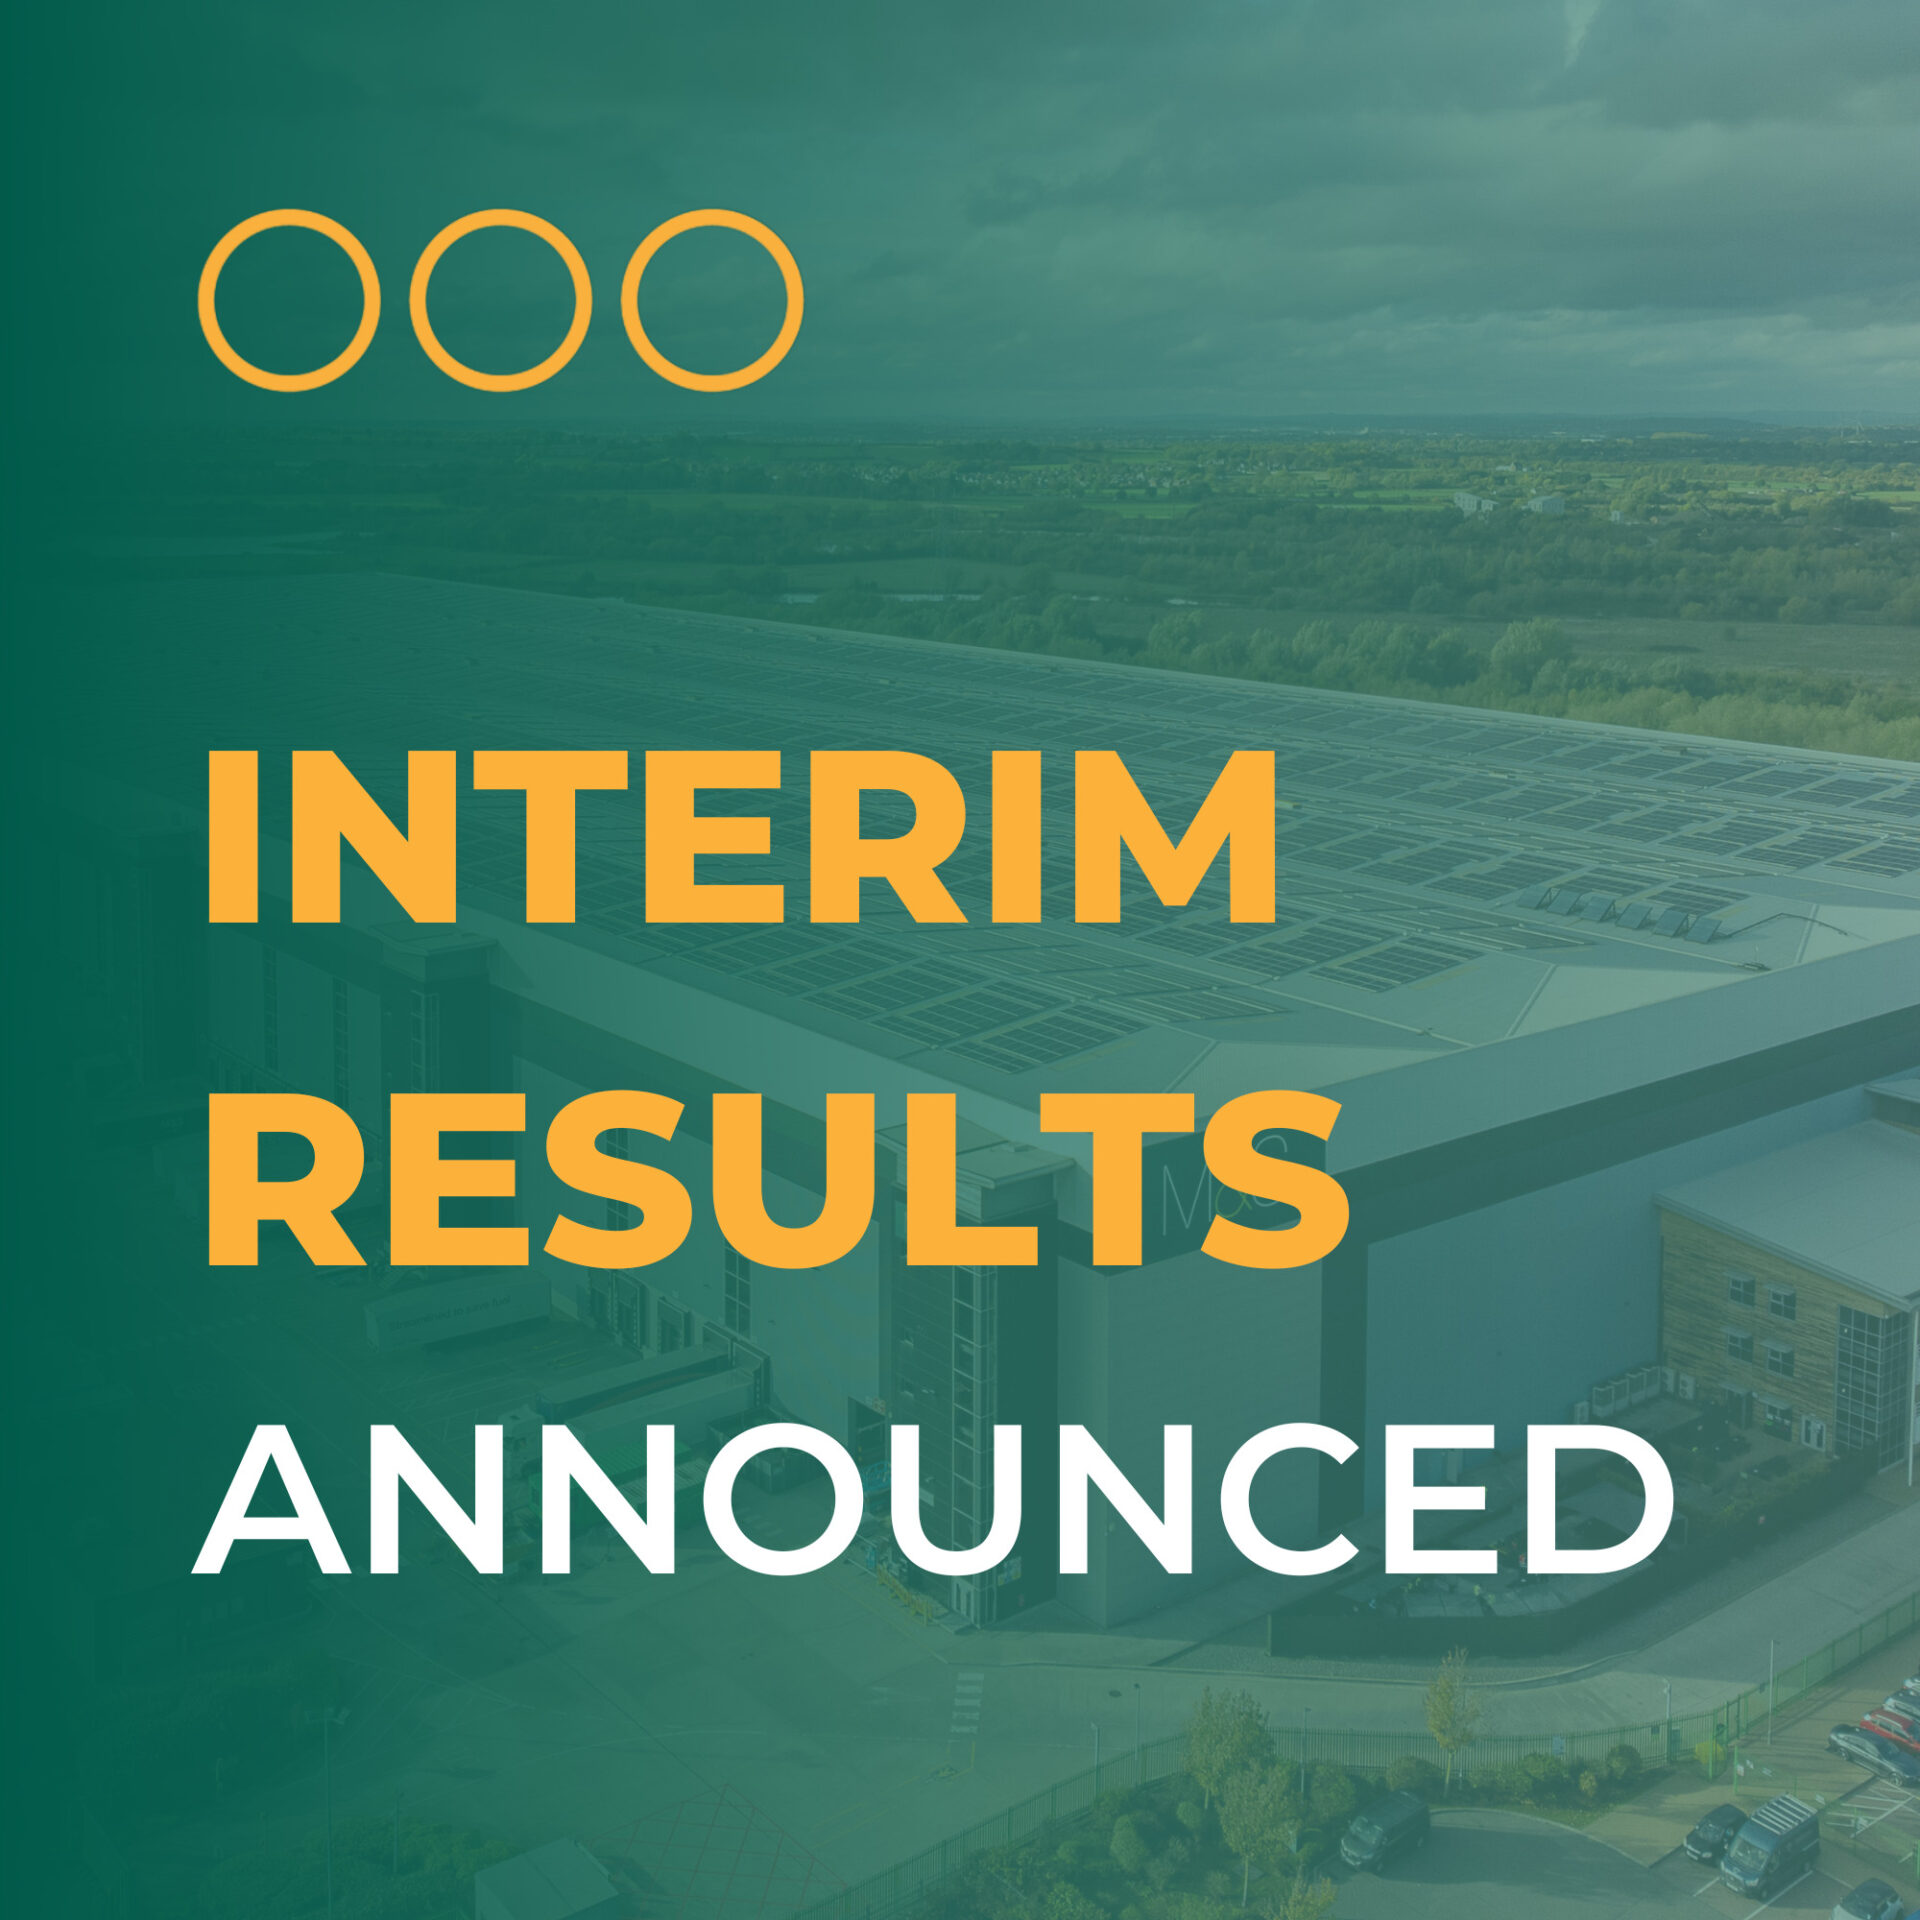 ROOF interim results announced